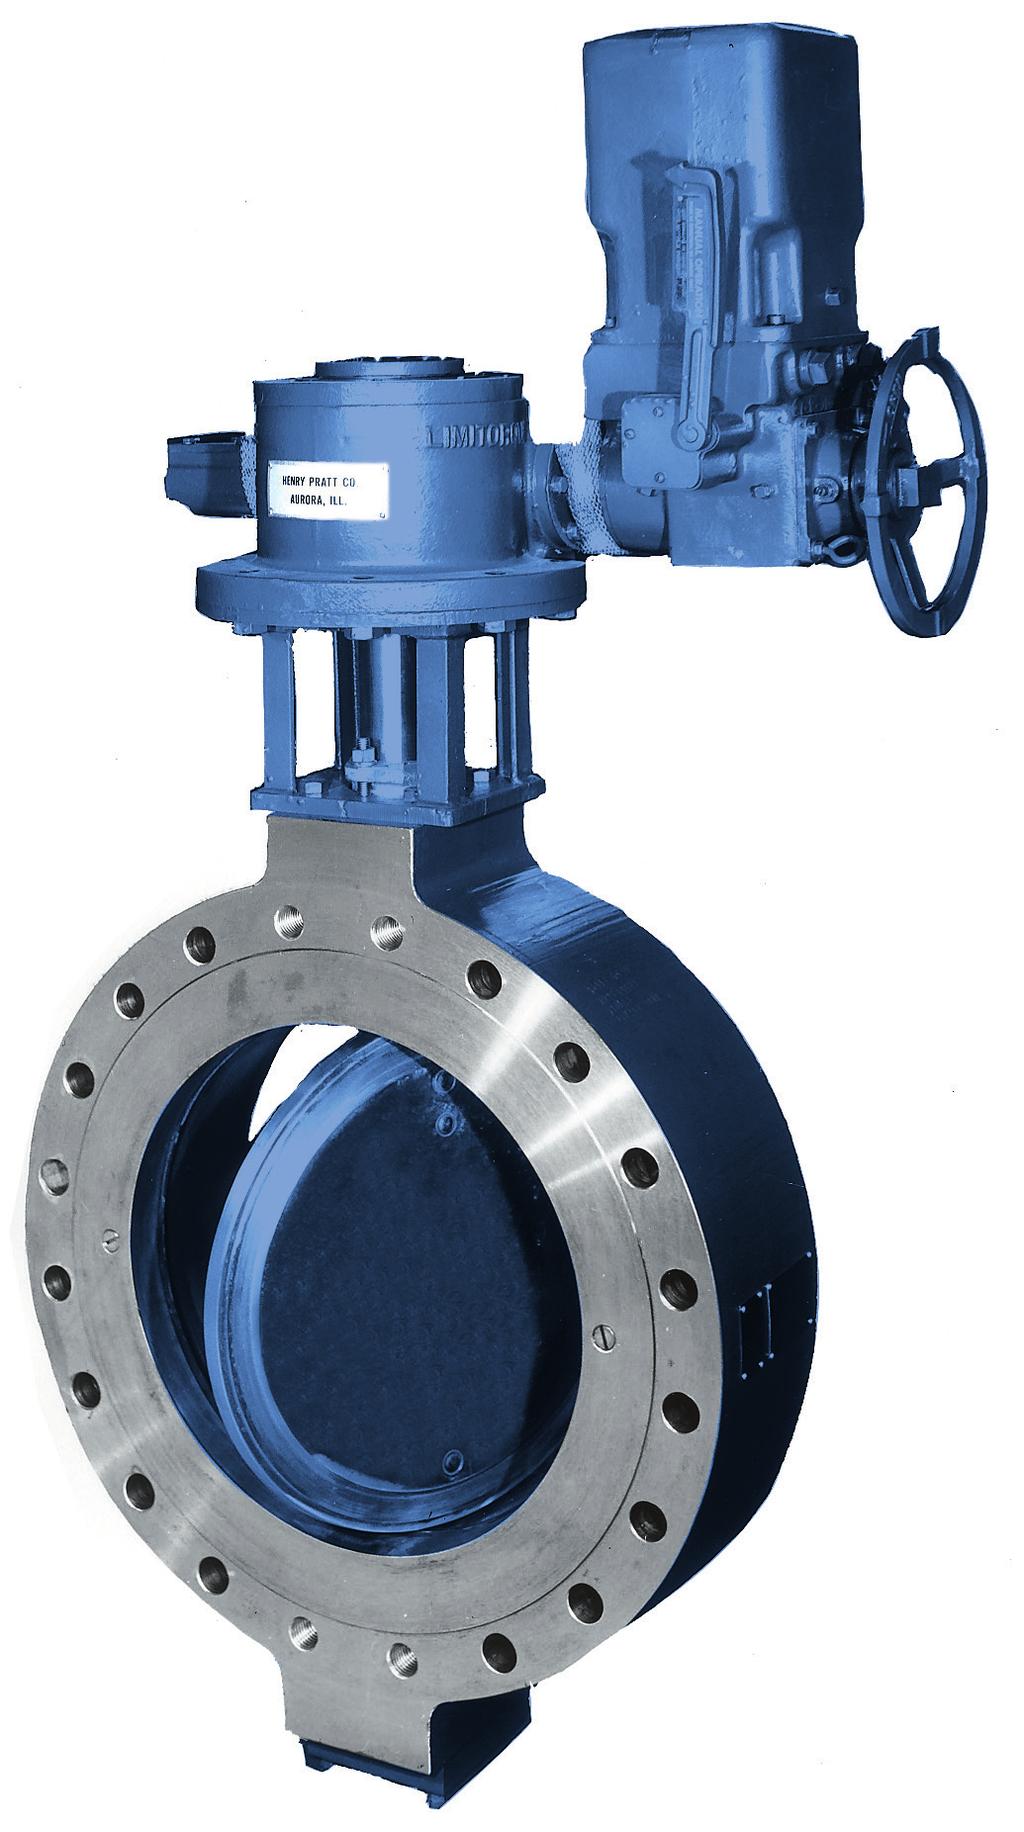 Scope of Line: Pratt Series 1100 Nuclear Water Valve ASME Class 2 & 3 Nuclear Safety Related Water Ser vice Butterfly Valves Sizes: 6 inches through 36 inches standard.